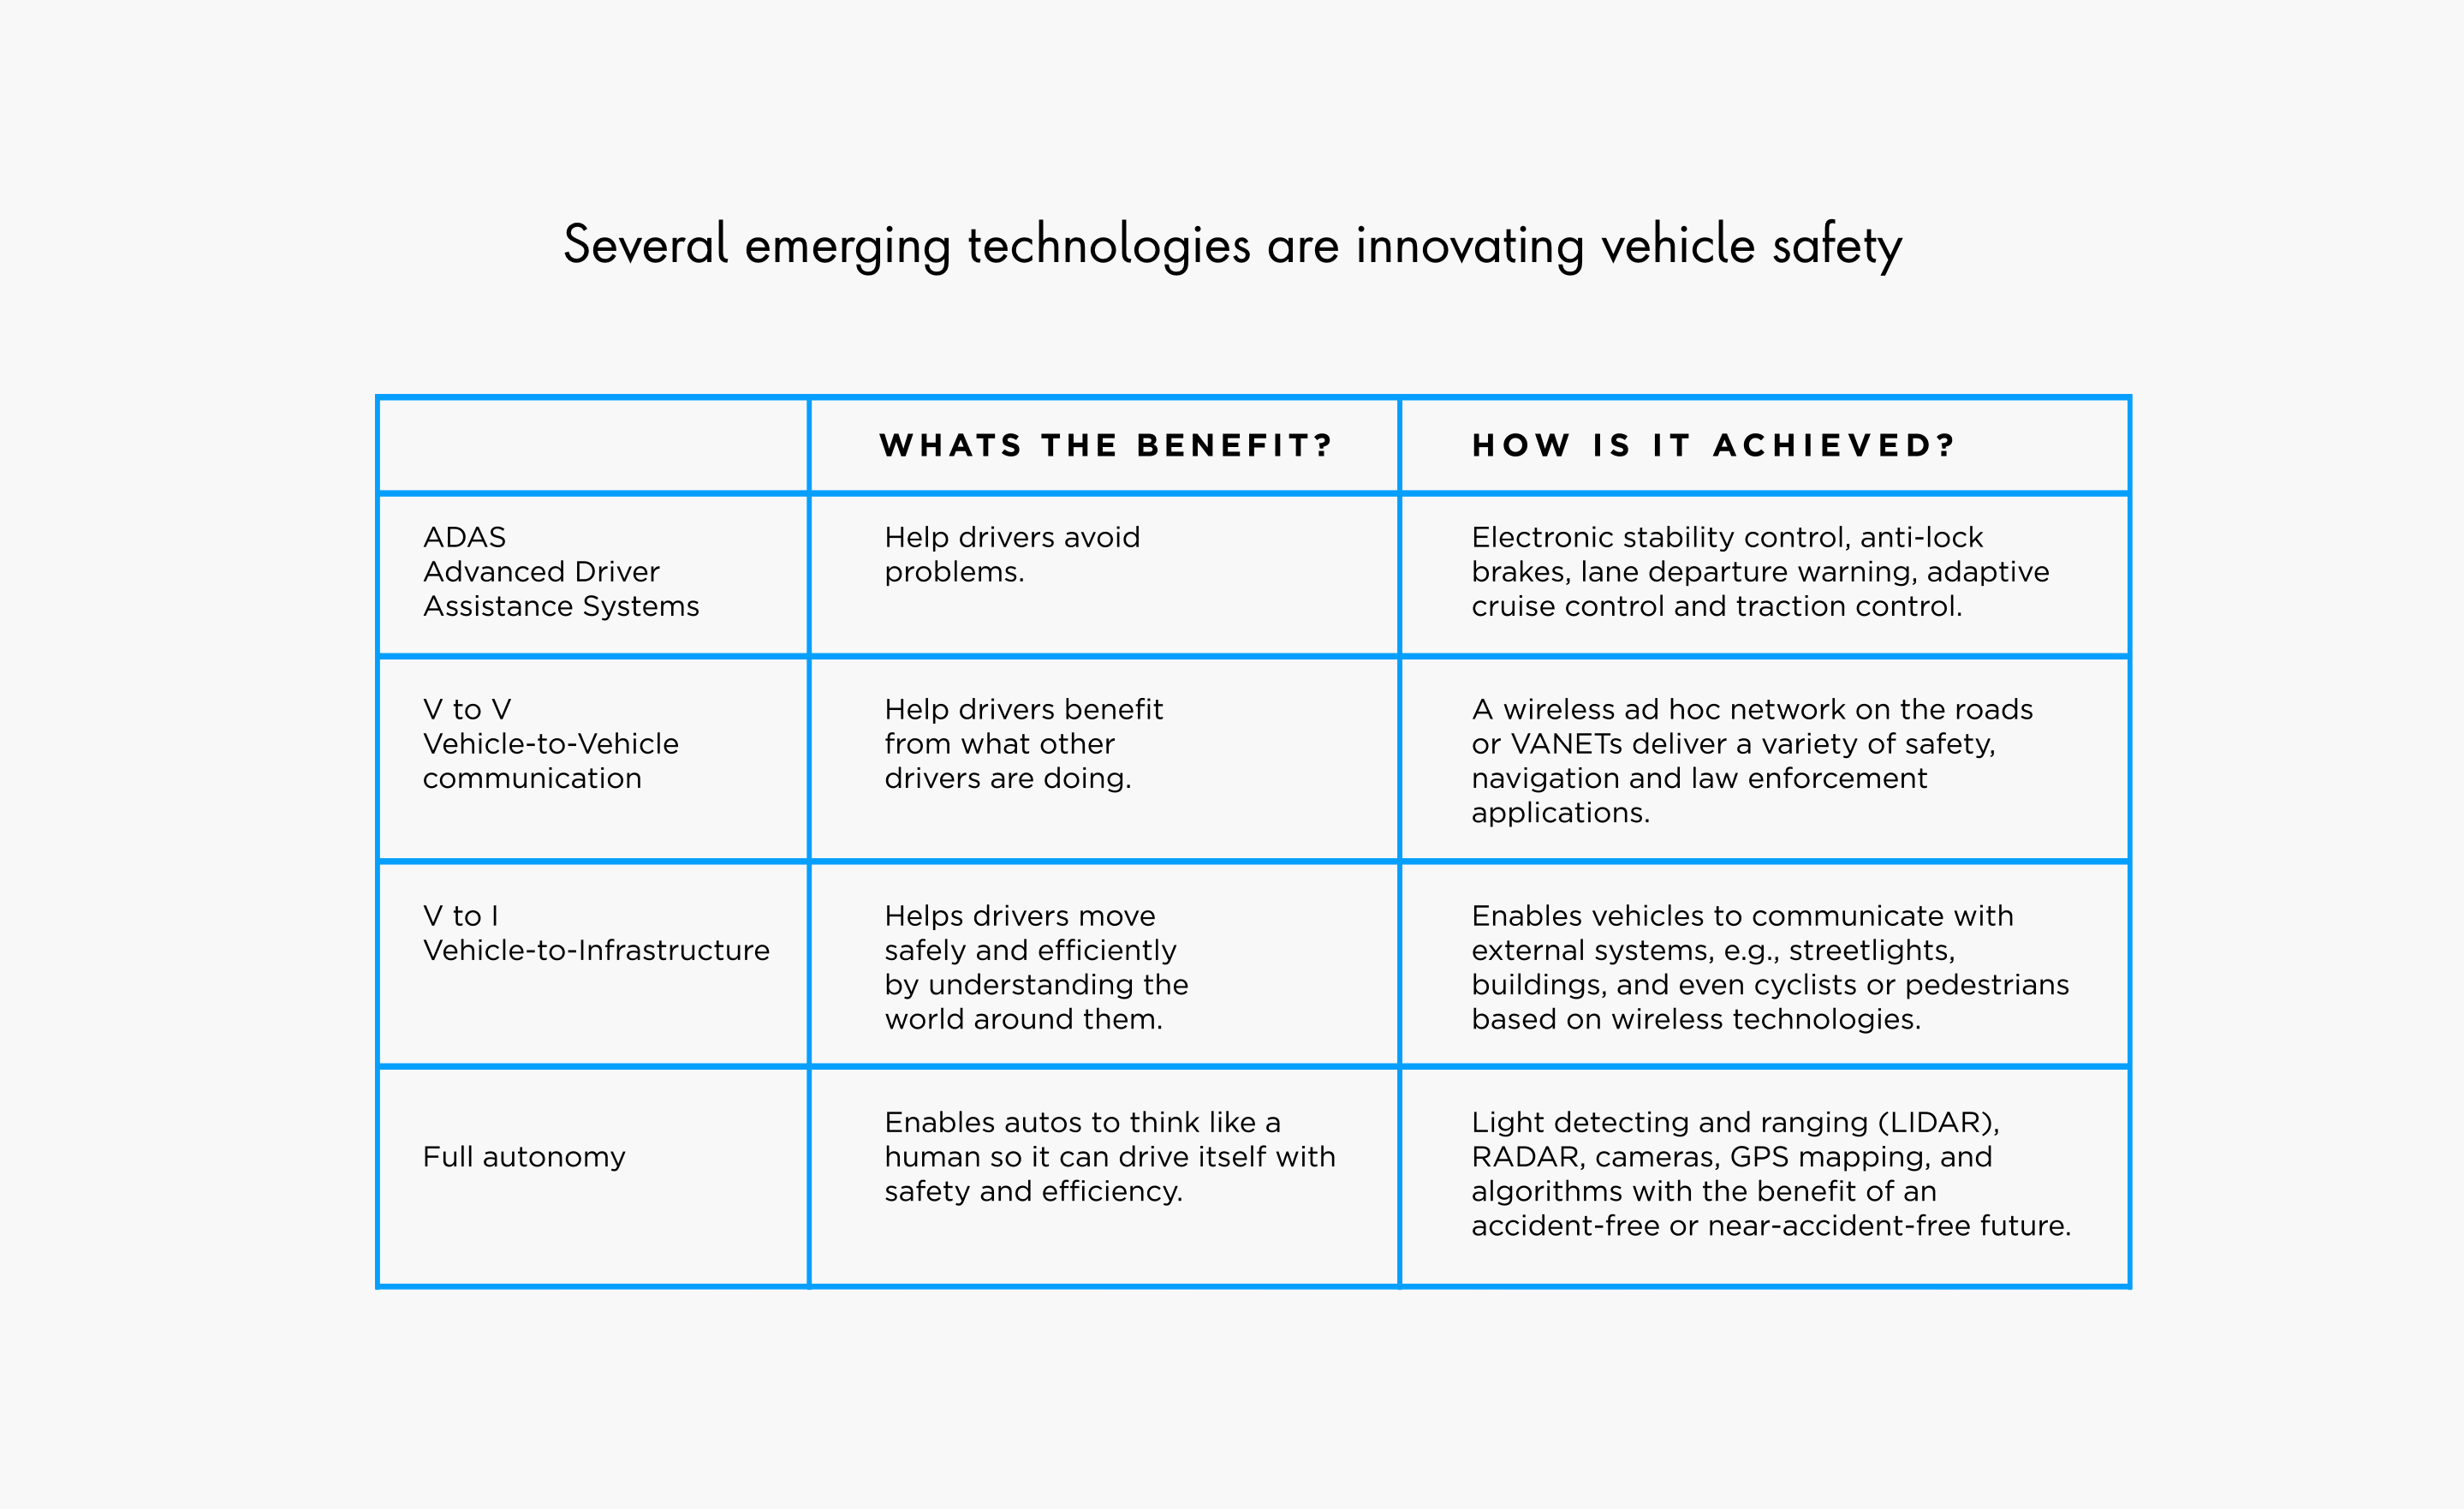 Several emerging technologies are innovating vehicle safety